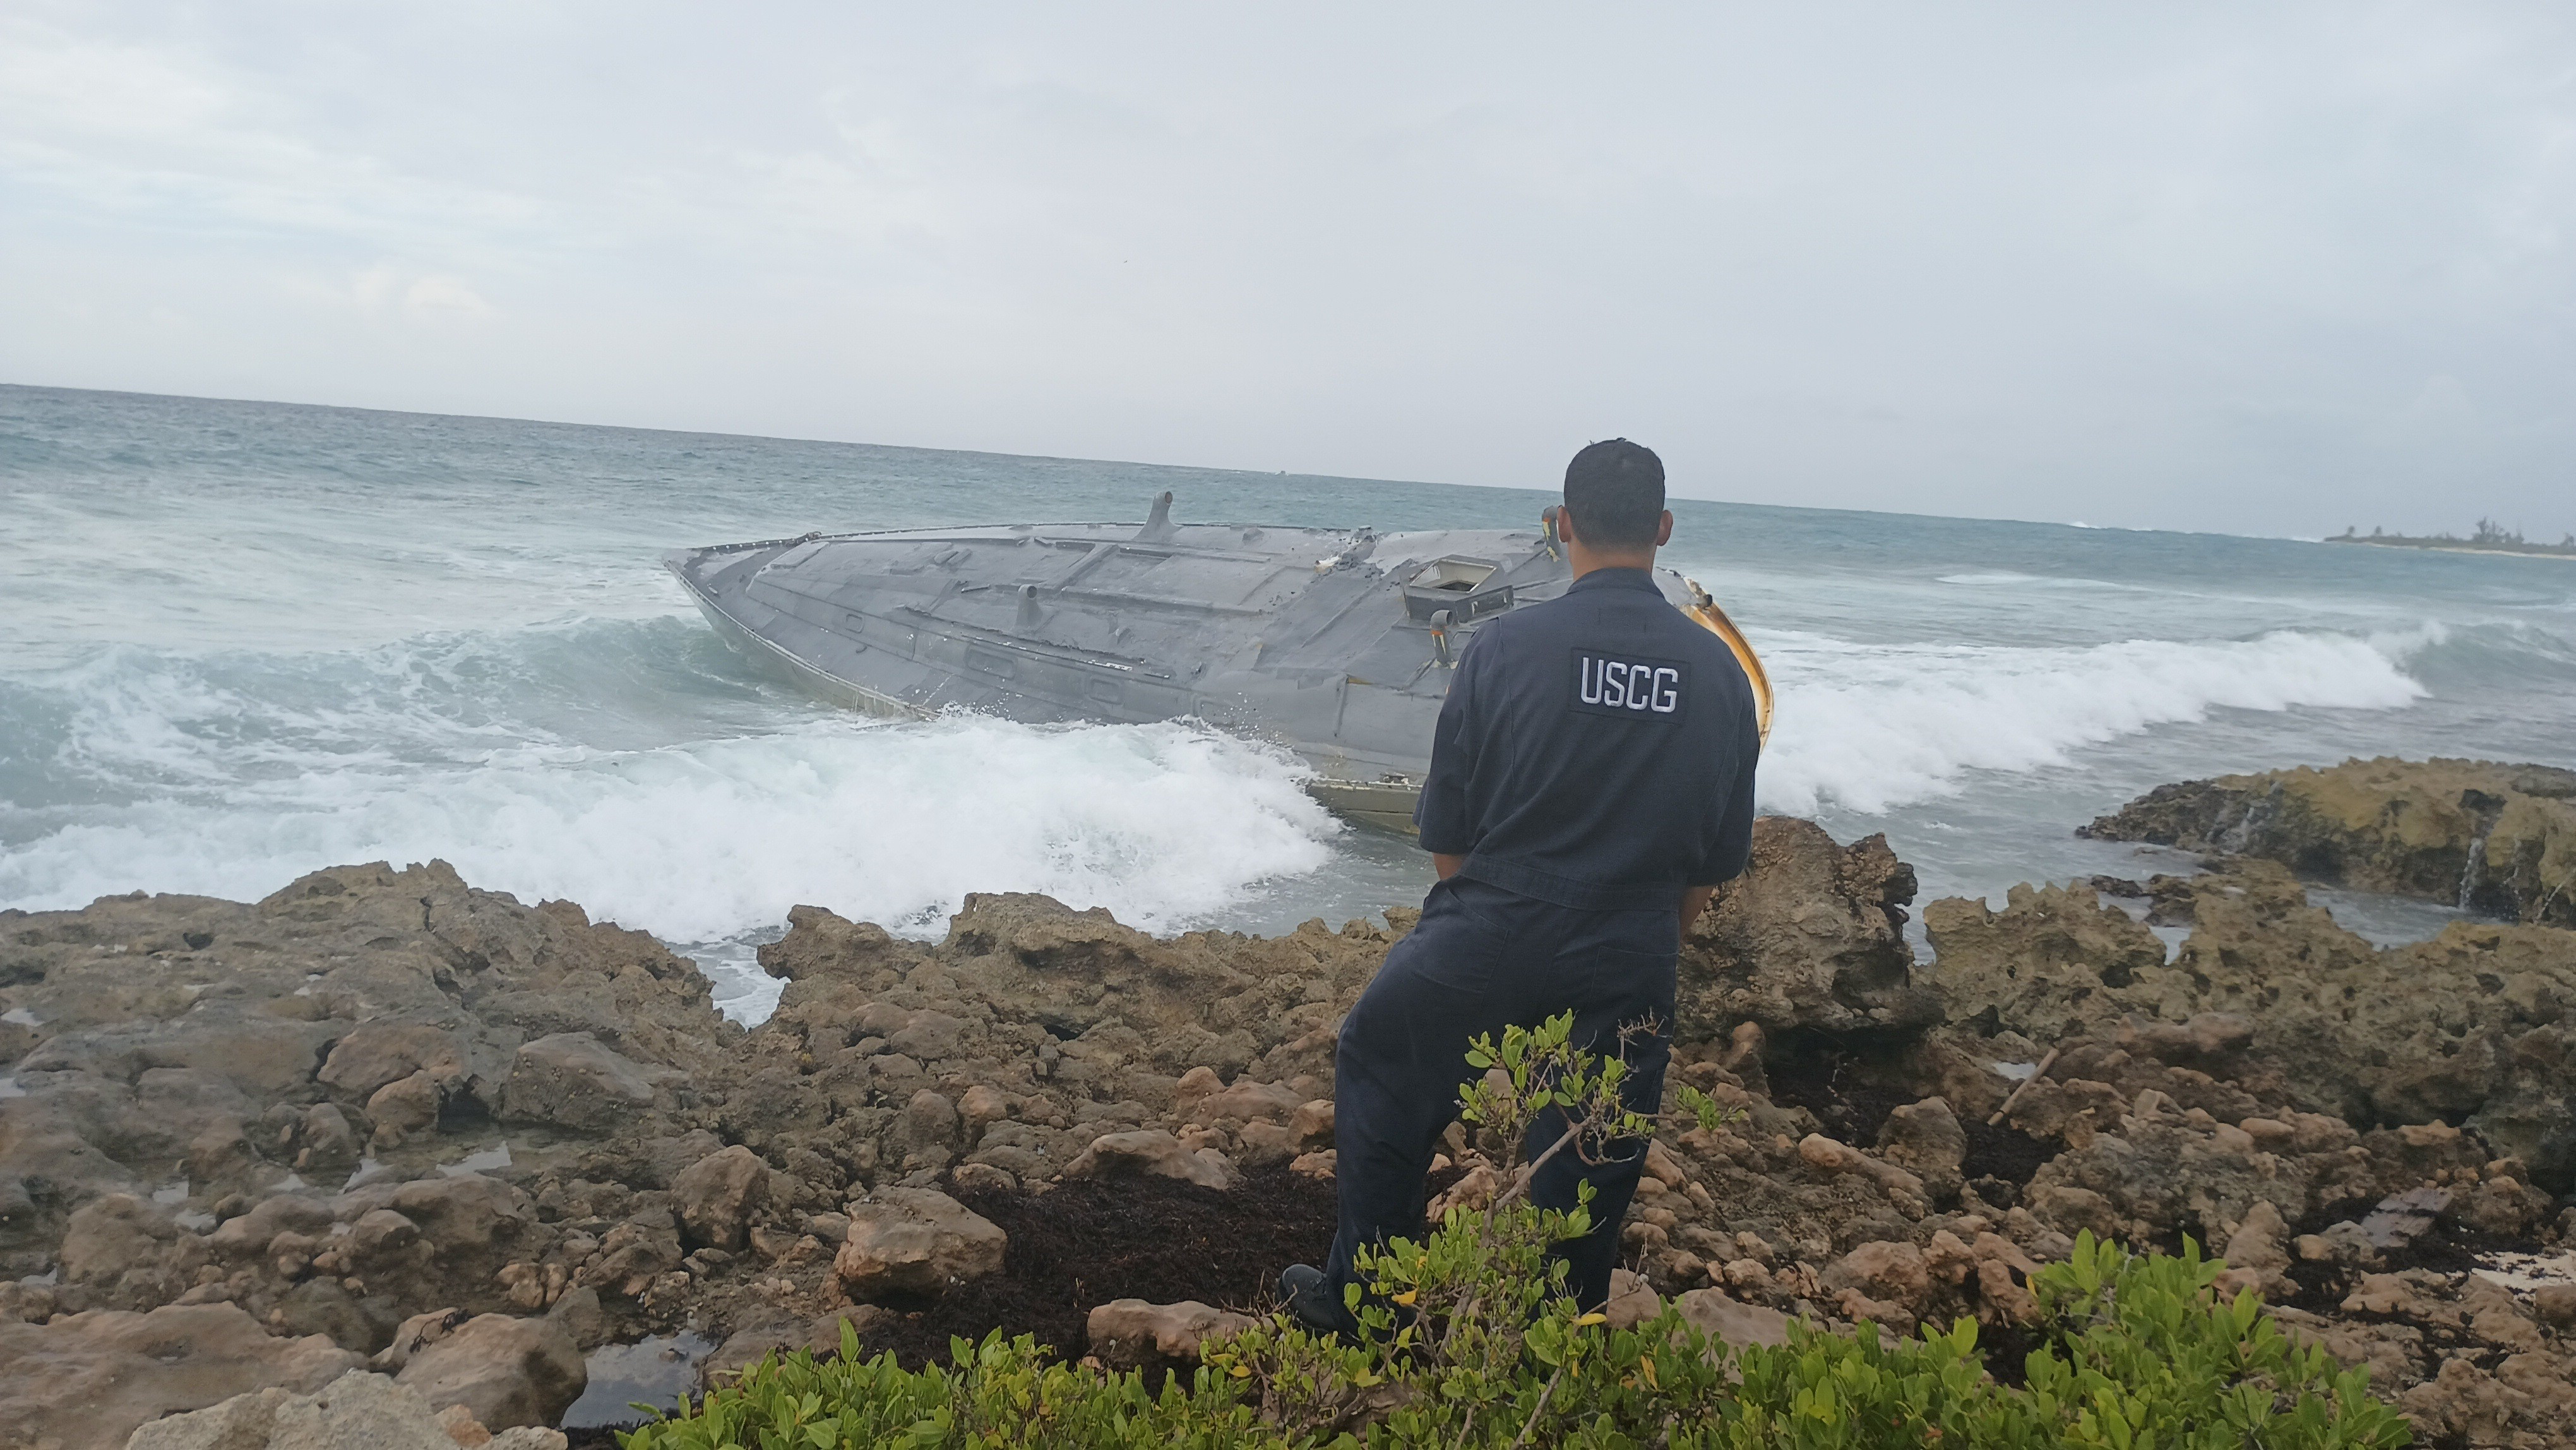 A USCG spill responder stands on a rocky shoreline, looking at a semi-submersible vessel that has grounded nearby.